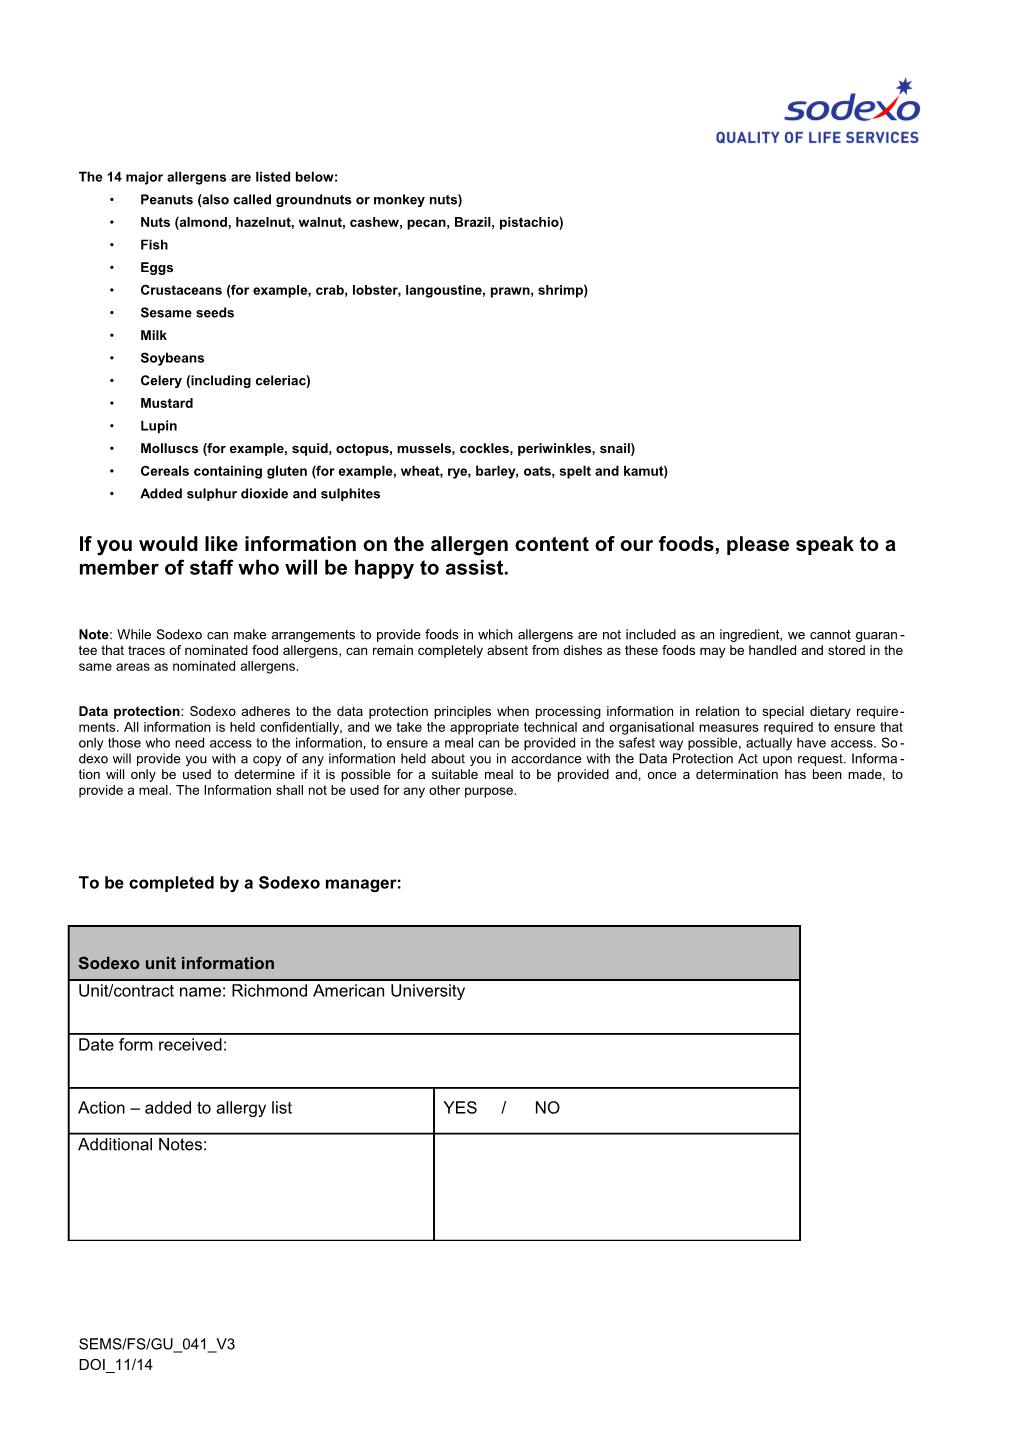 This Form Should Be Completed by Students Who Have a Food Allergy and Emailed To